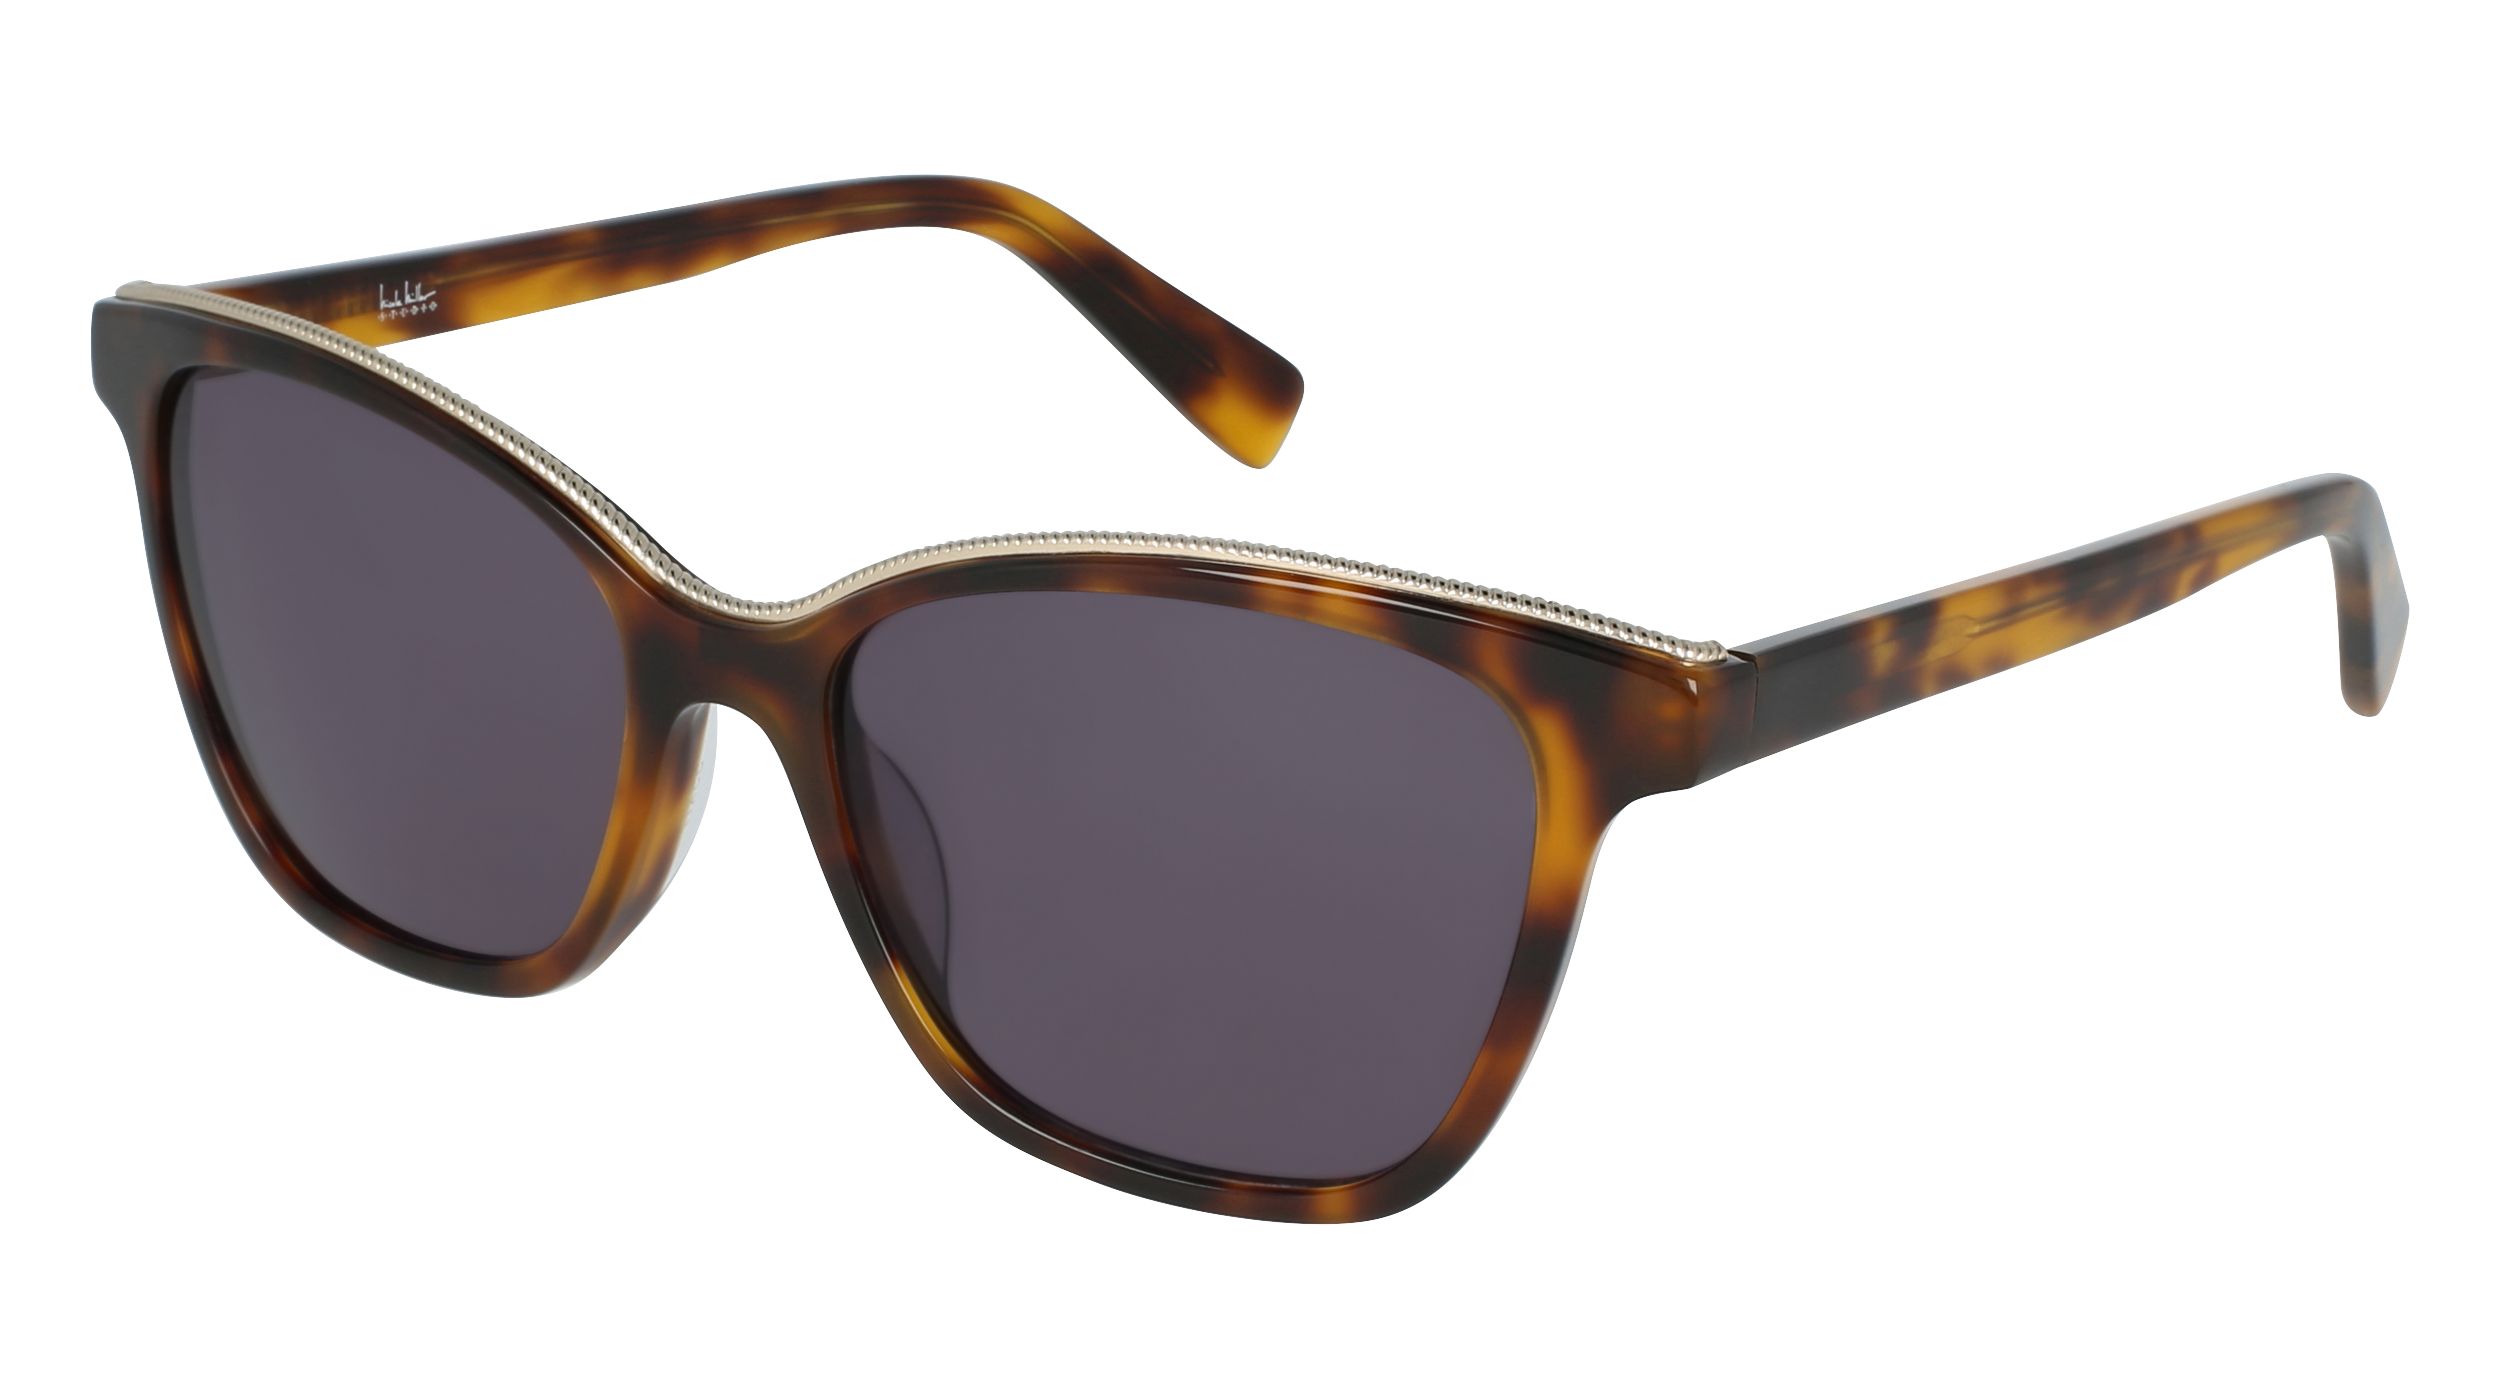 N NMS 15 women's sunglasses (from the side)